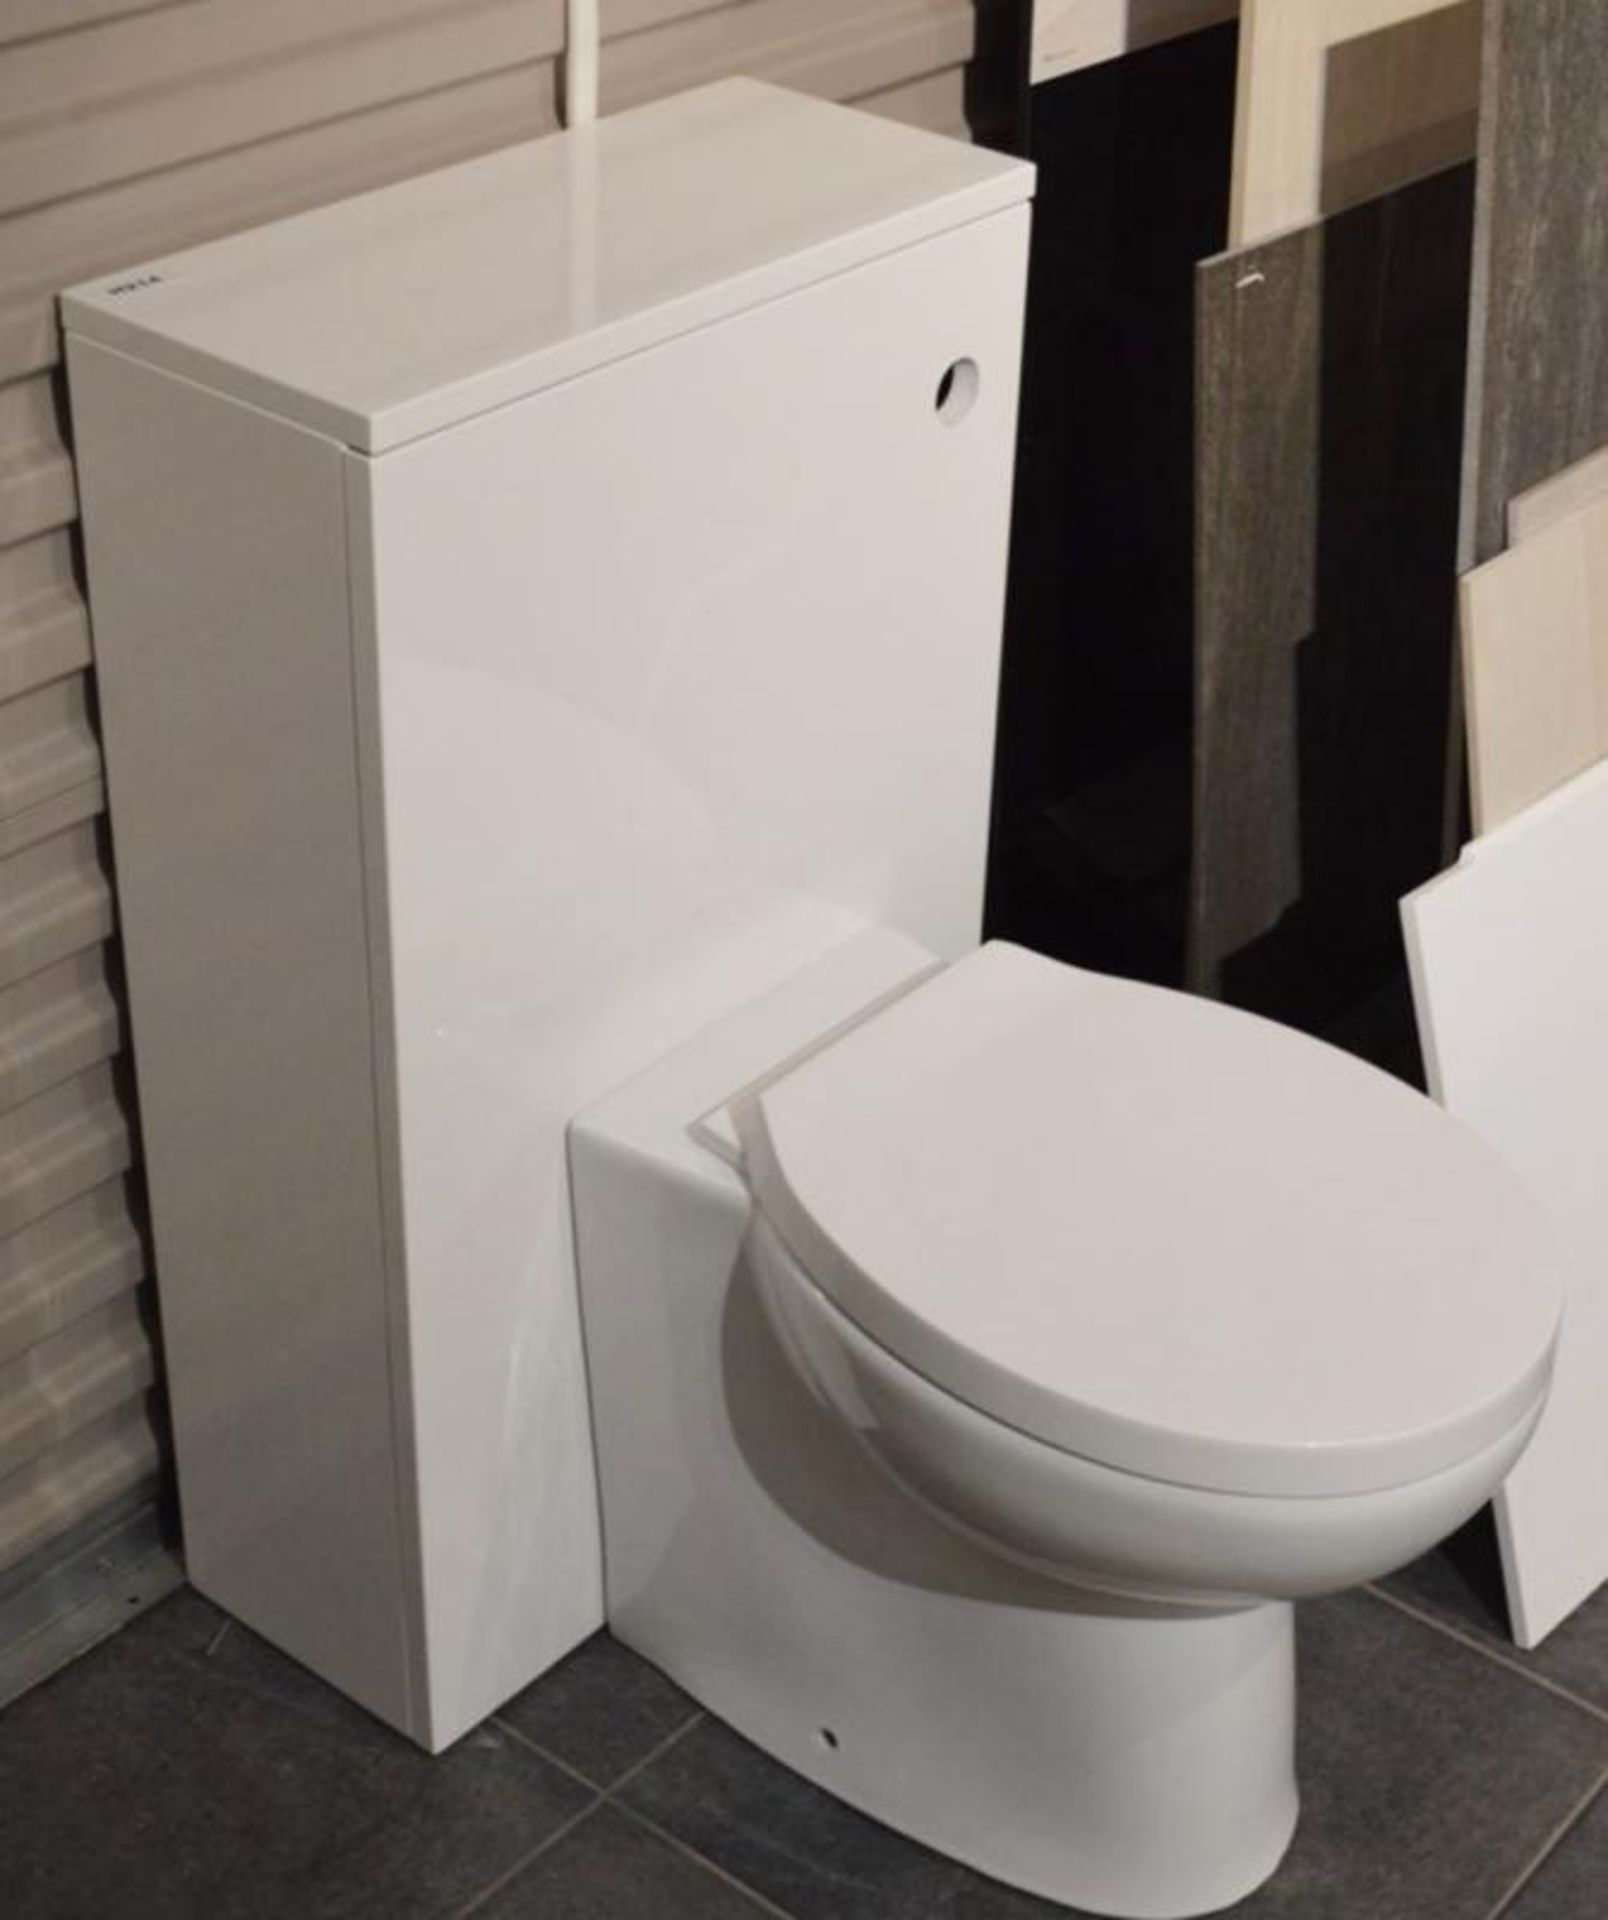 1 x White Gloss Back to Wall Toilet Pan With Concealed Cistern Unit and Soft Close Seat - CL406 - Re